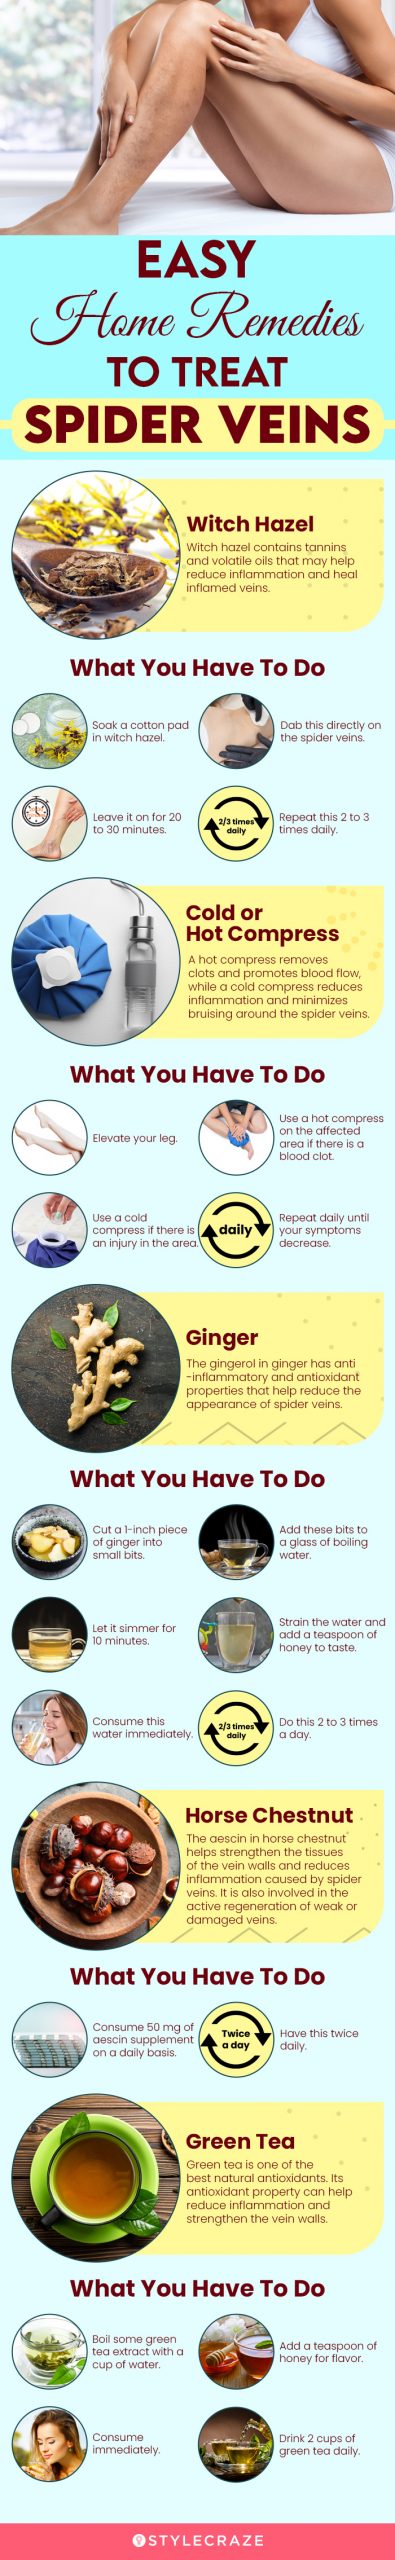 easy home remedies to treat spider veins (infographic)